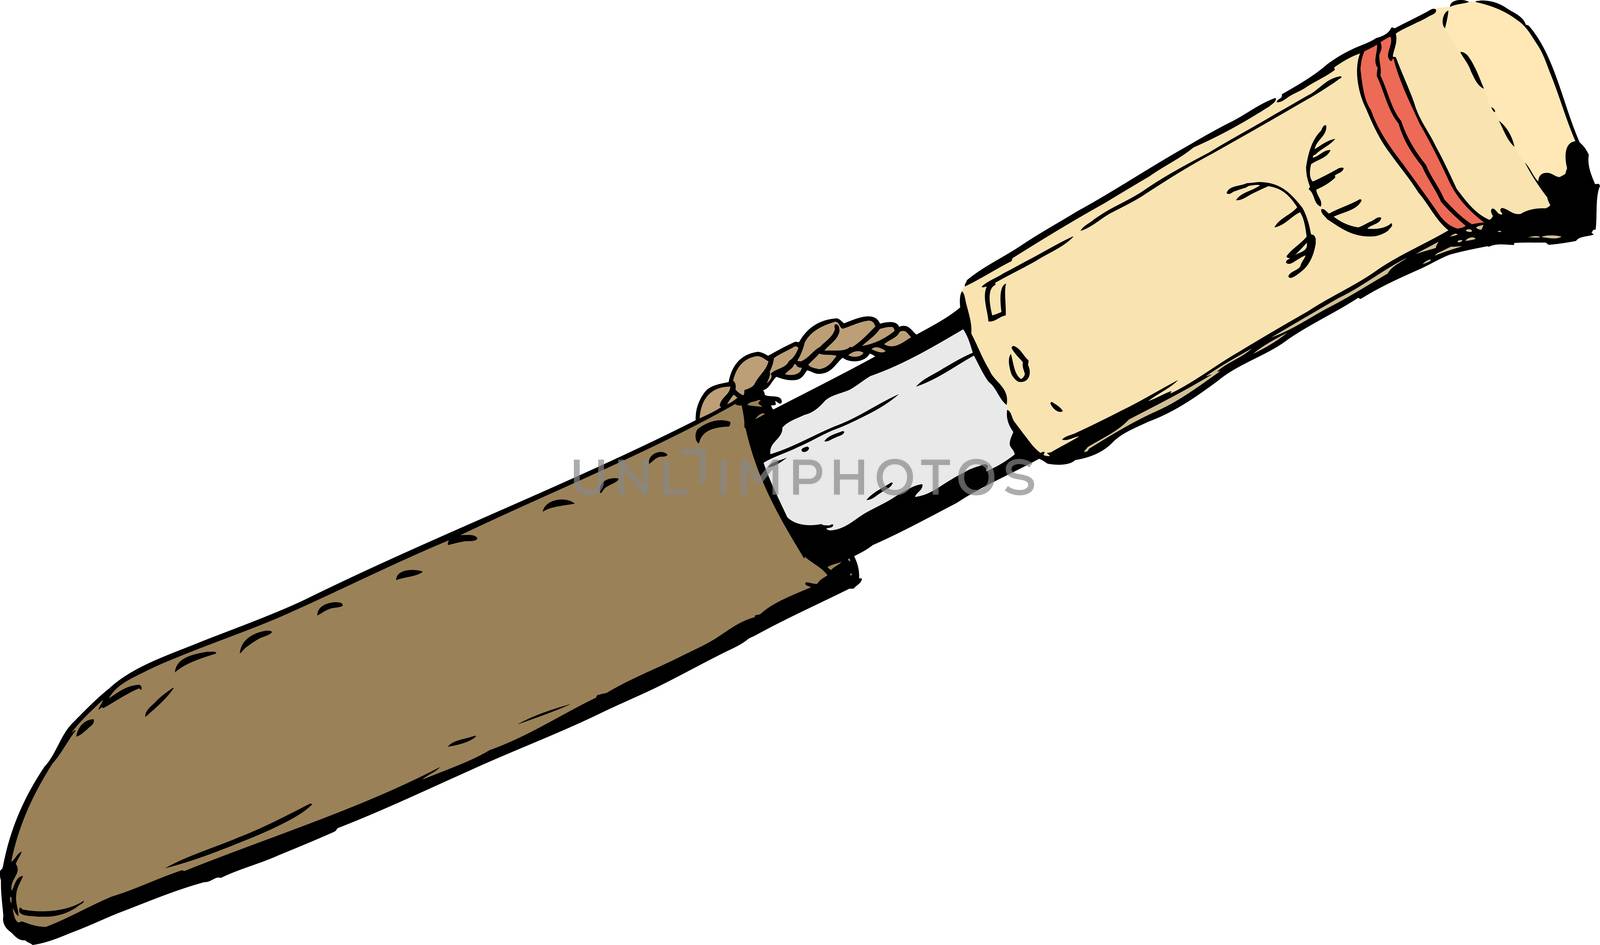 Hand drawn illustration of a single Saami hunting knife with holster